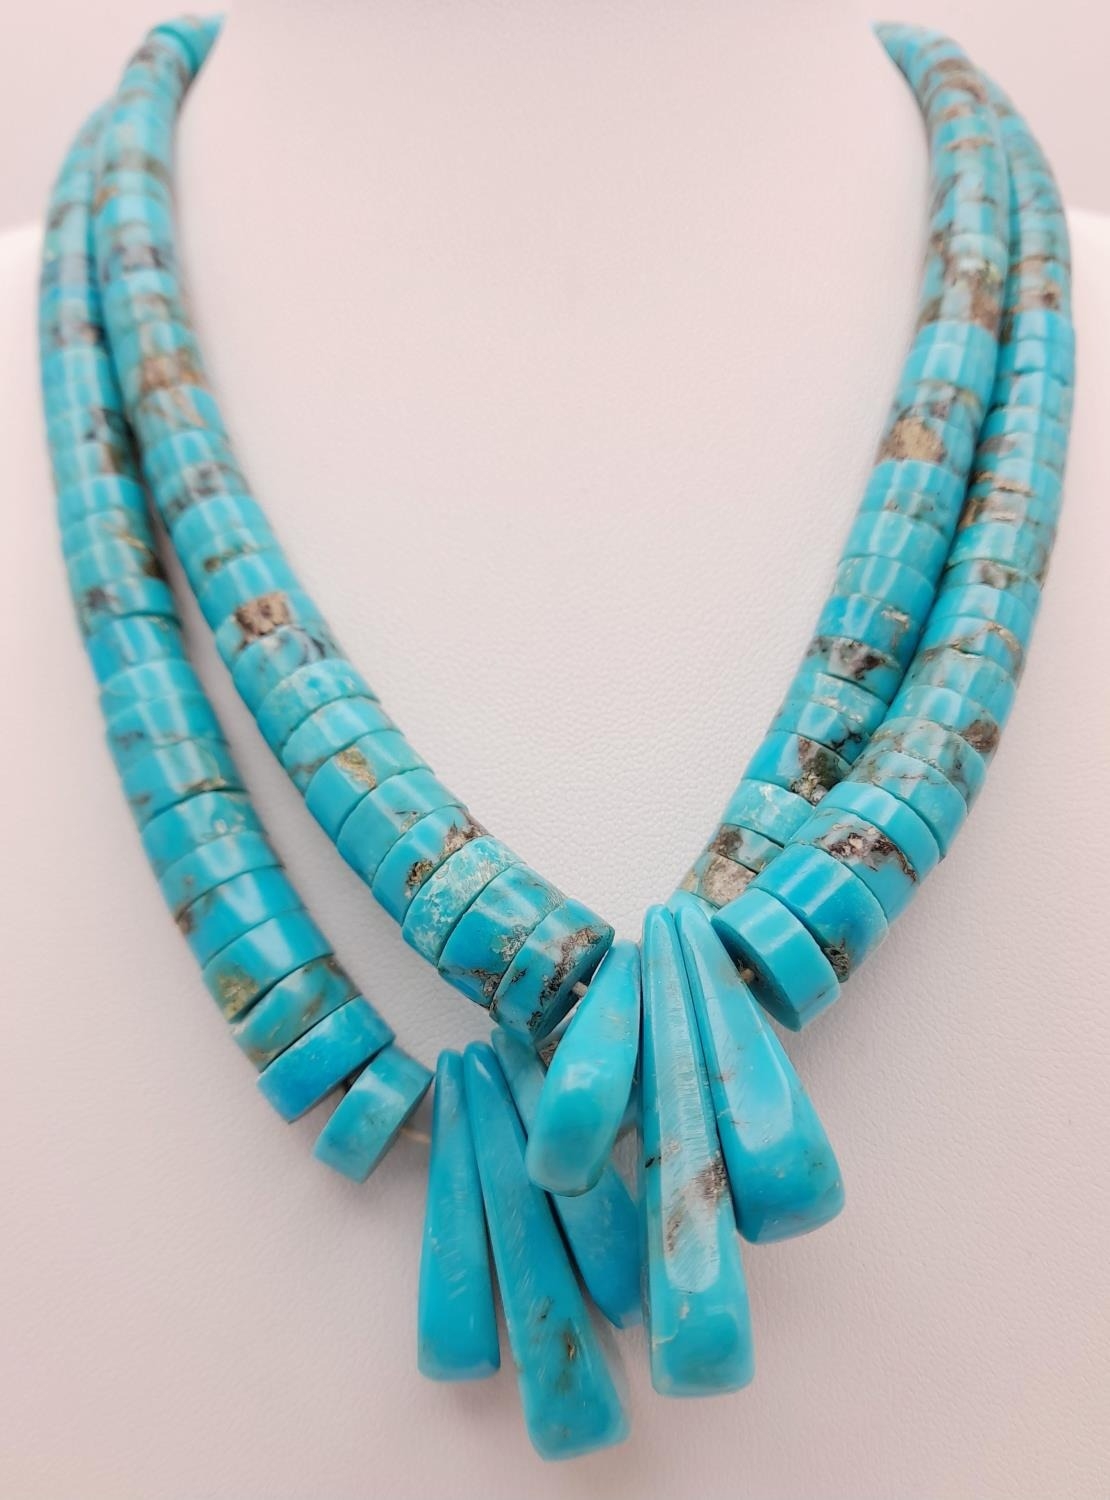 A Historically significant Navaho Native American turquoise and sterling silver double necklace.